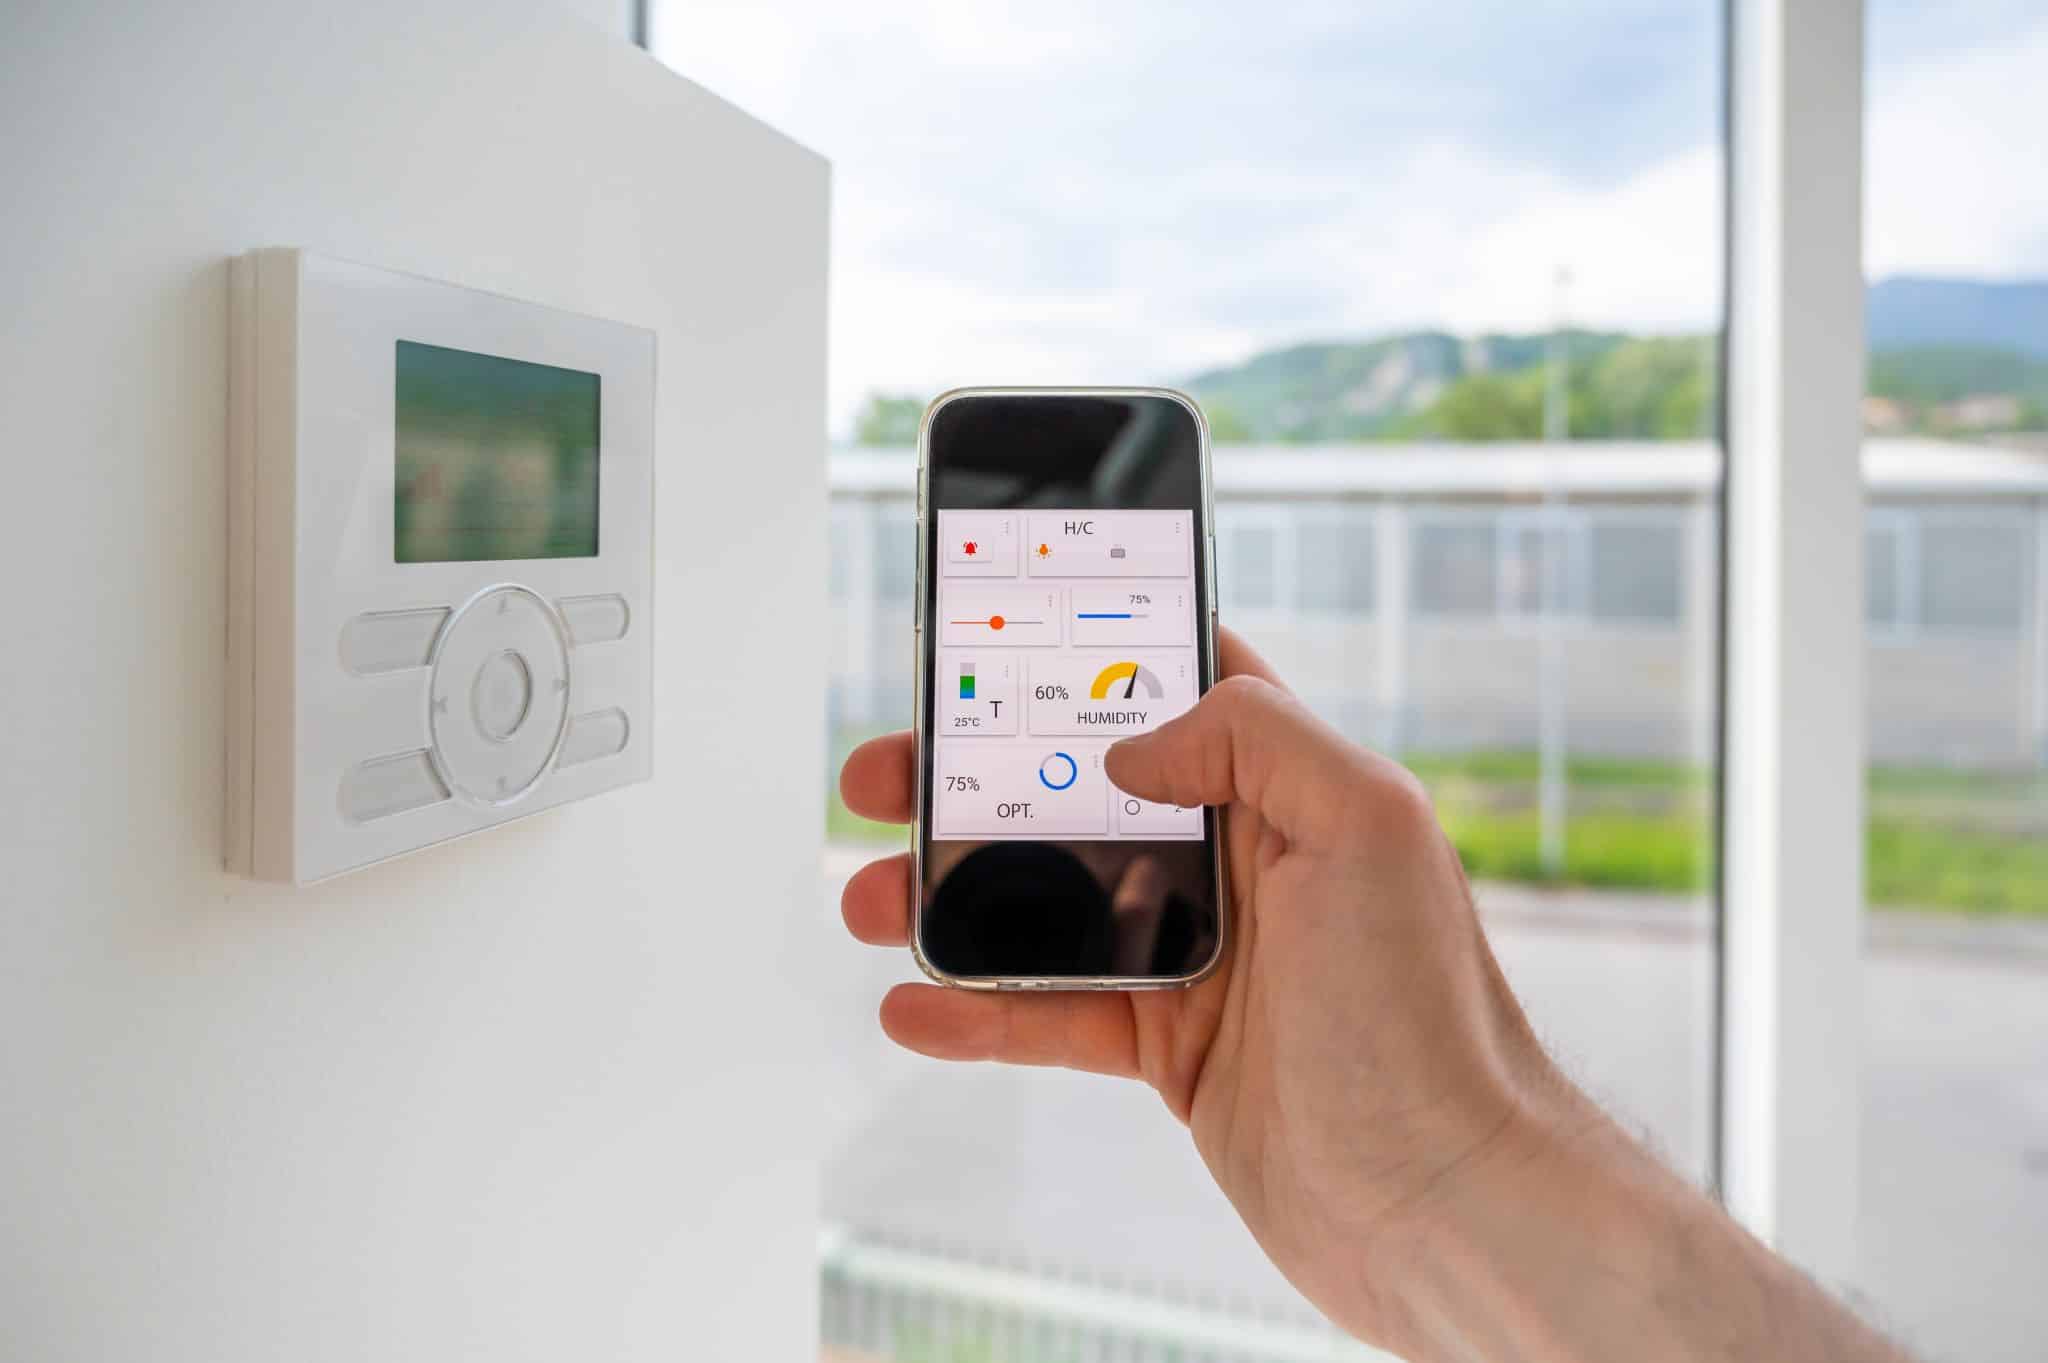 Hand picks up remote control evoking home automation in smart home